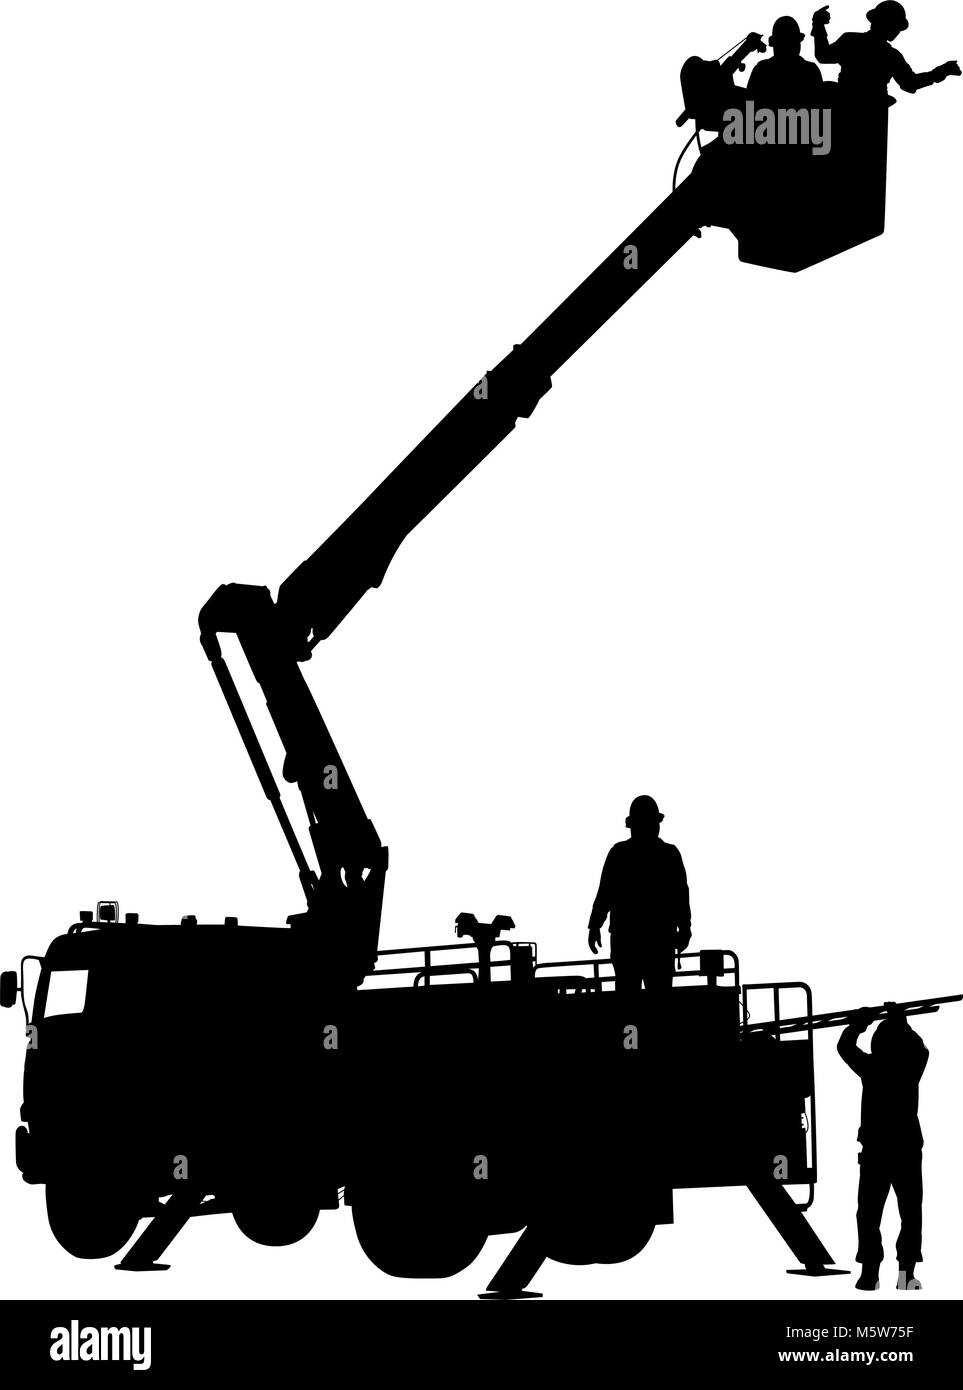 Editable vector silhouette of an emergency or maintenance vehicle in action with people as separate objects Stock Vector